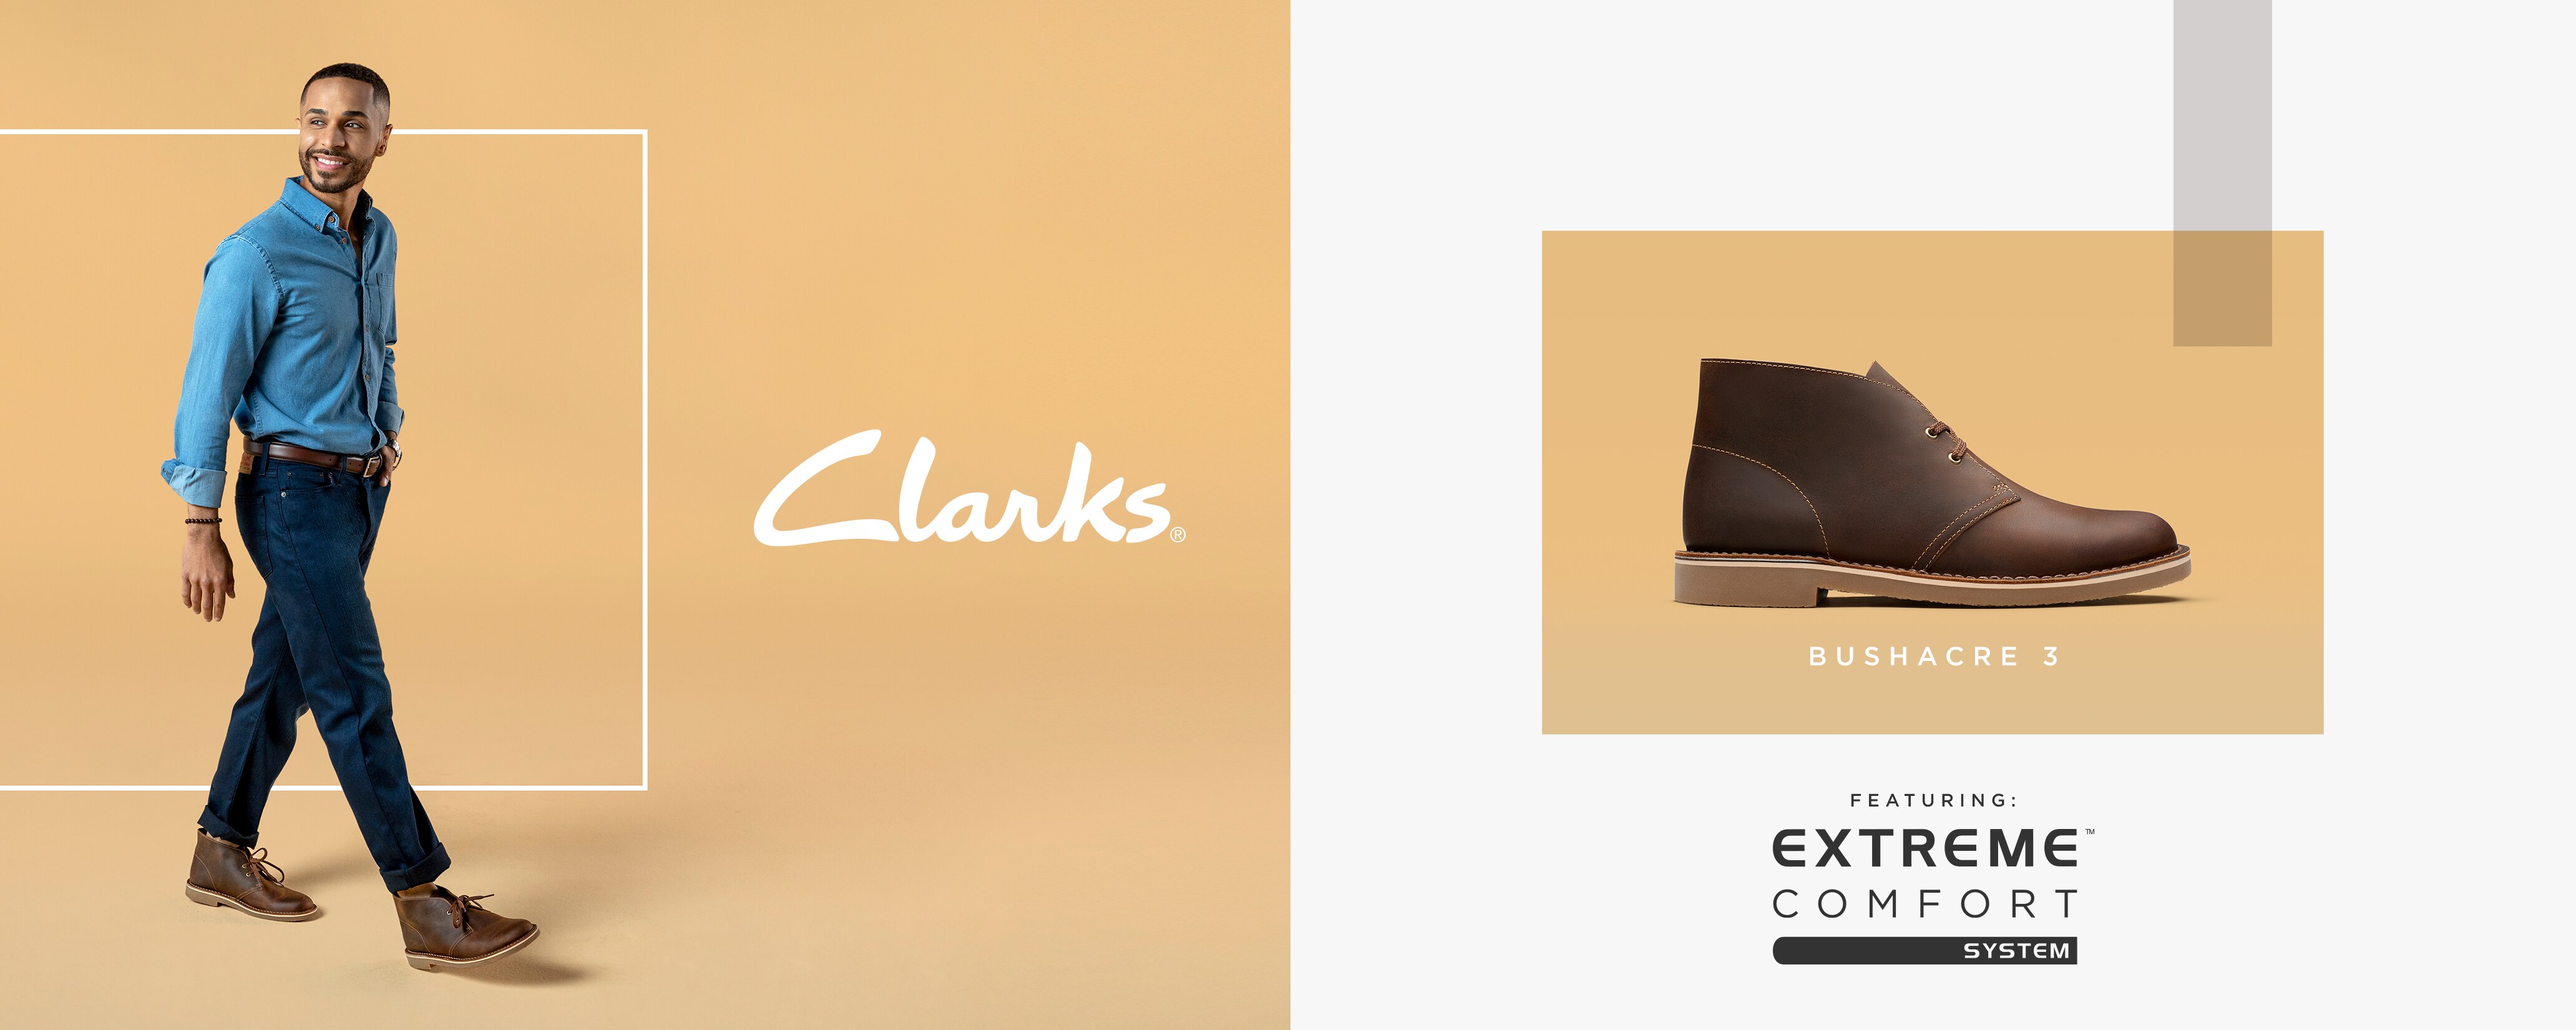 where to buy clarks shoes online